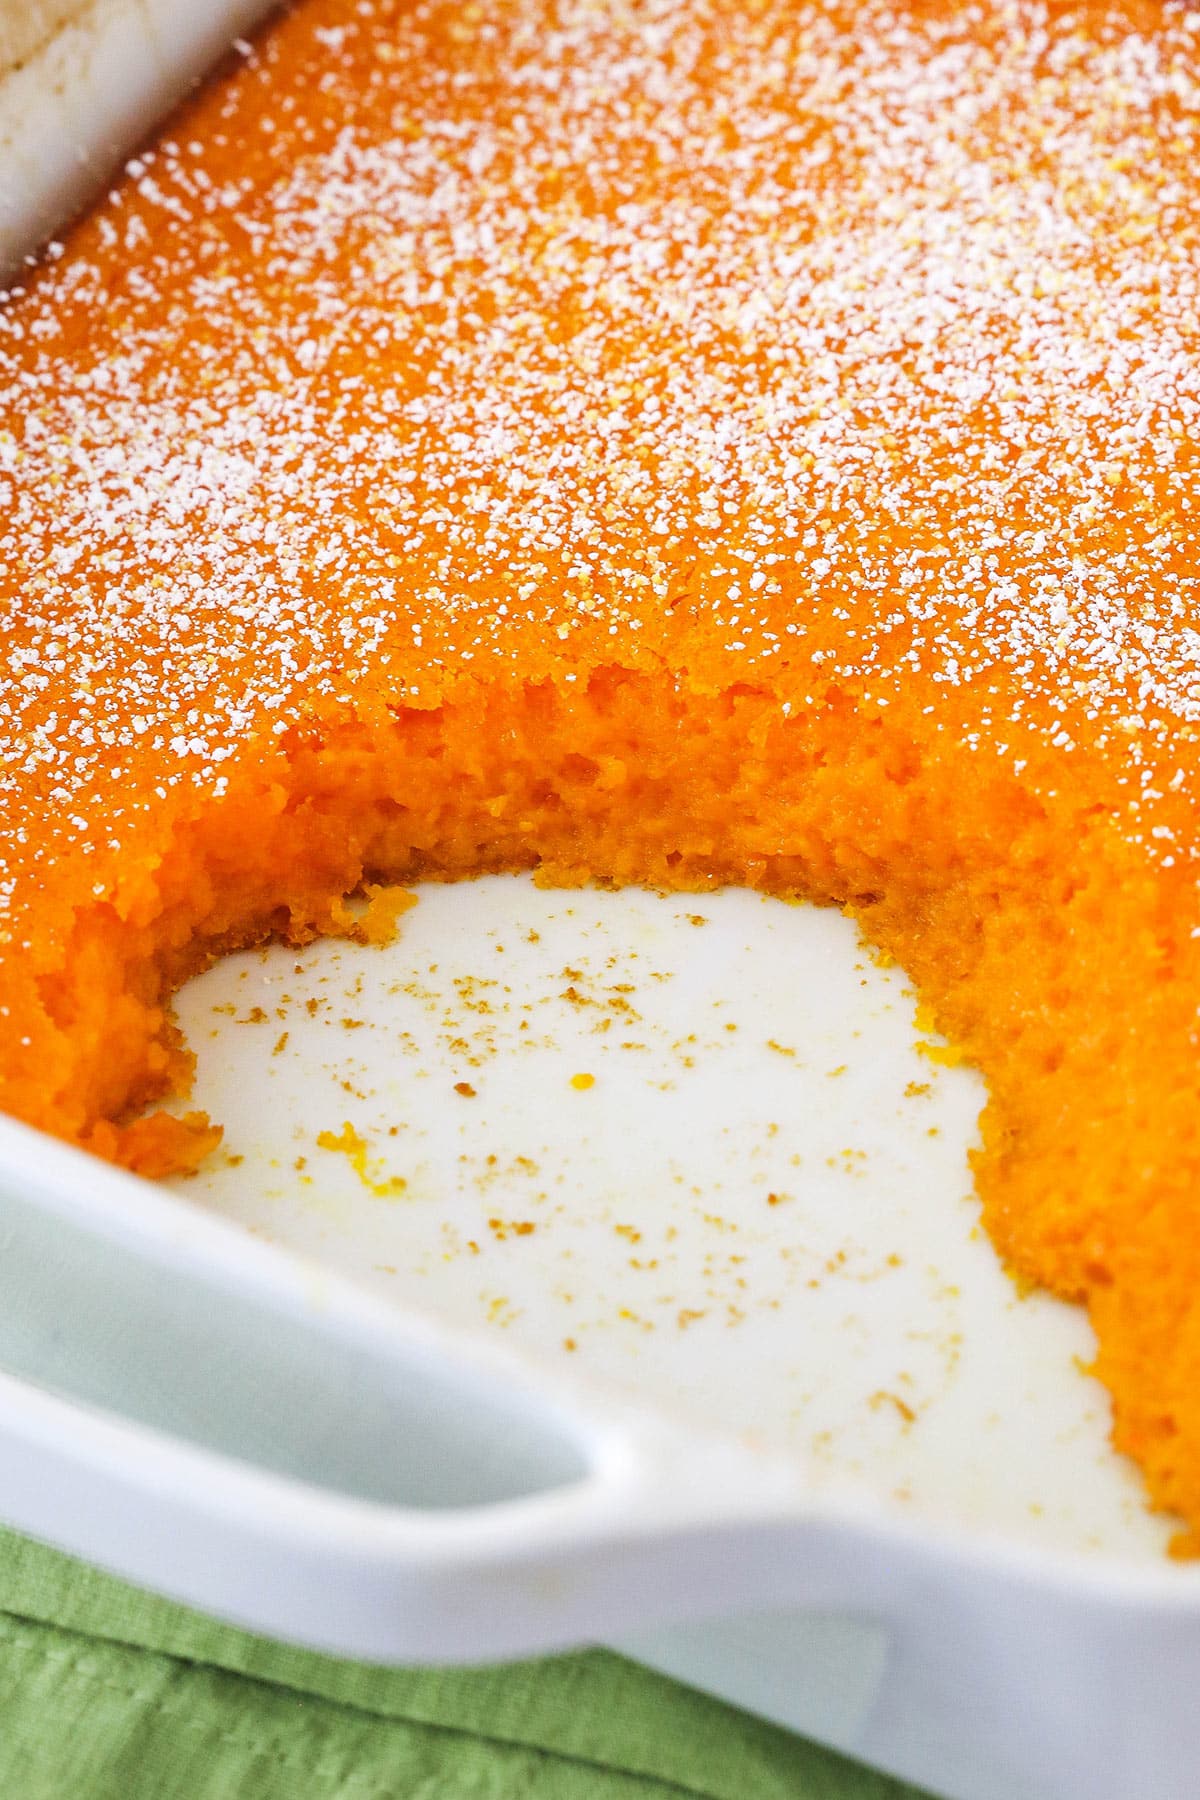 Fresh Carrot Souffle  The Side Dish You Didn't Know You Needed